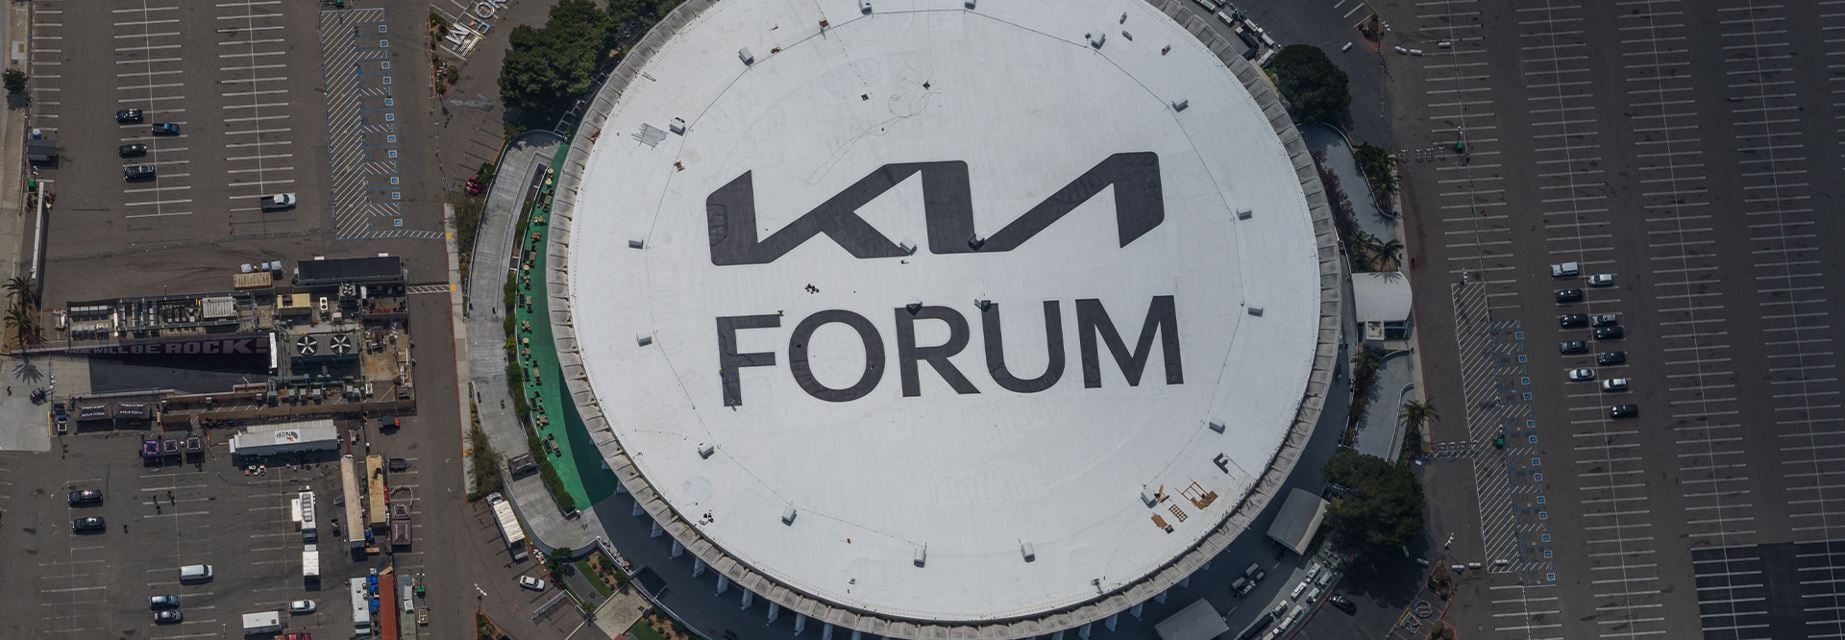 Aerial view of the Kia Forum GAF coated roof with new logo